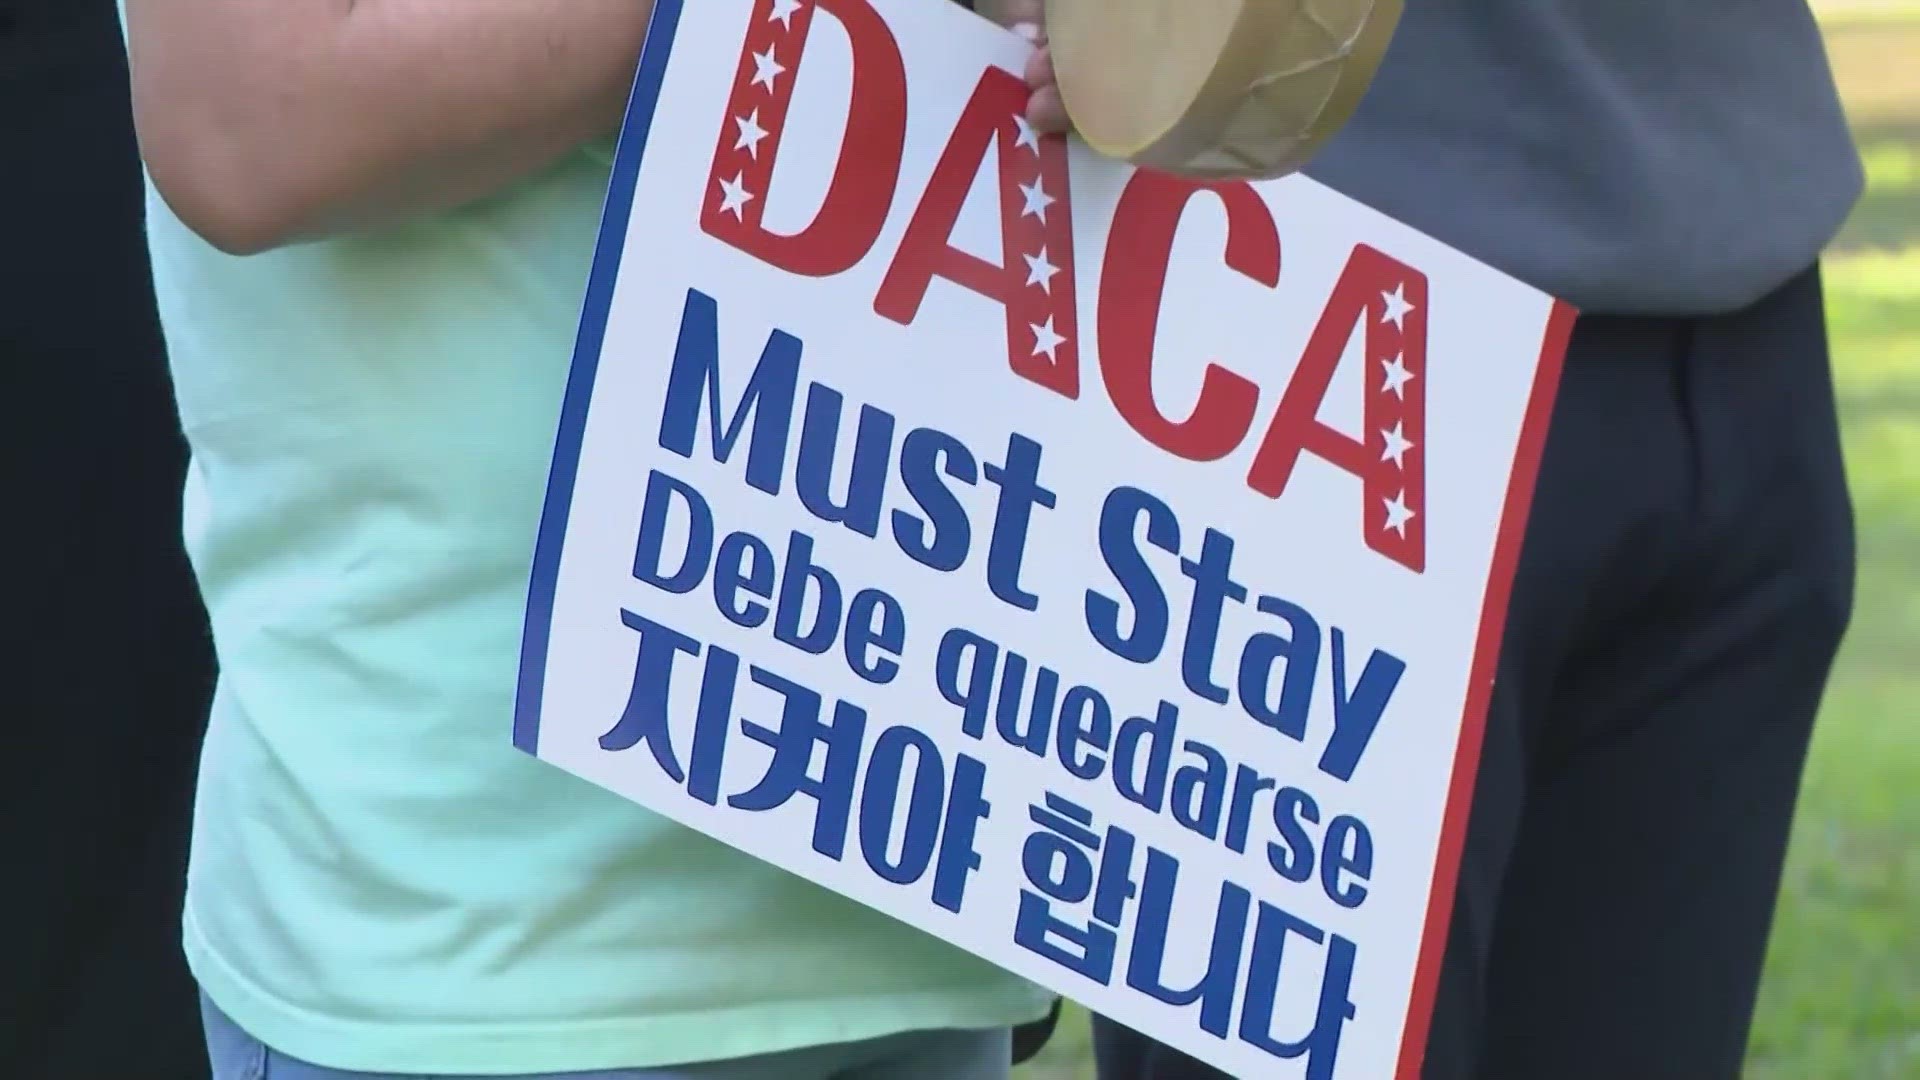 A Texas judge heard arguments on whether the Deferred Action on Childhood Arrivals program is legal. The ruling will impact over half a million people.